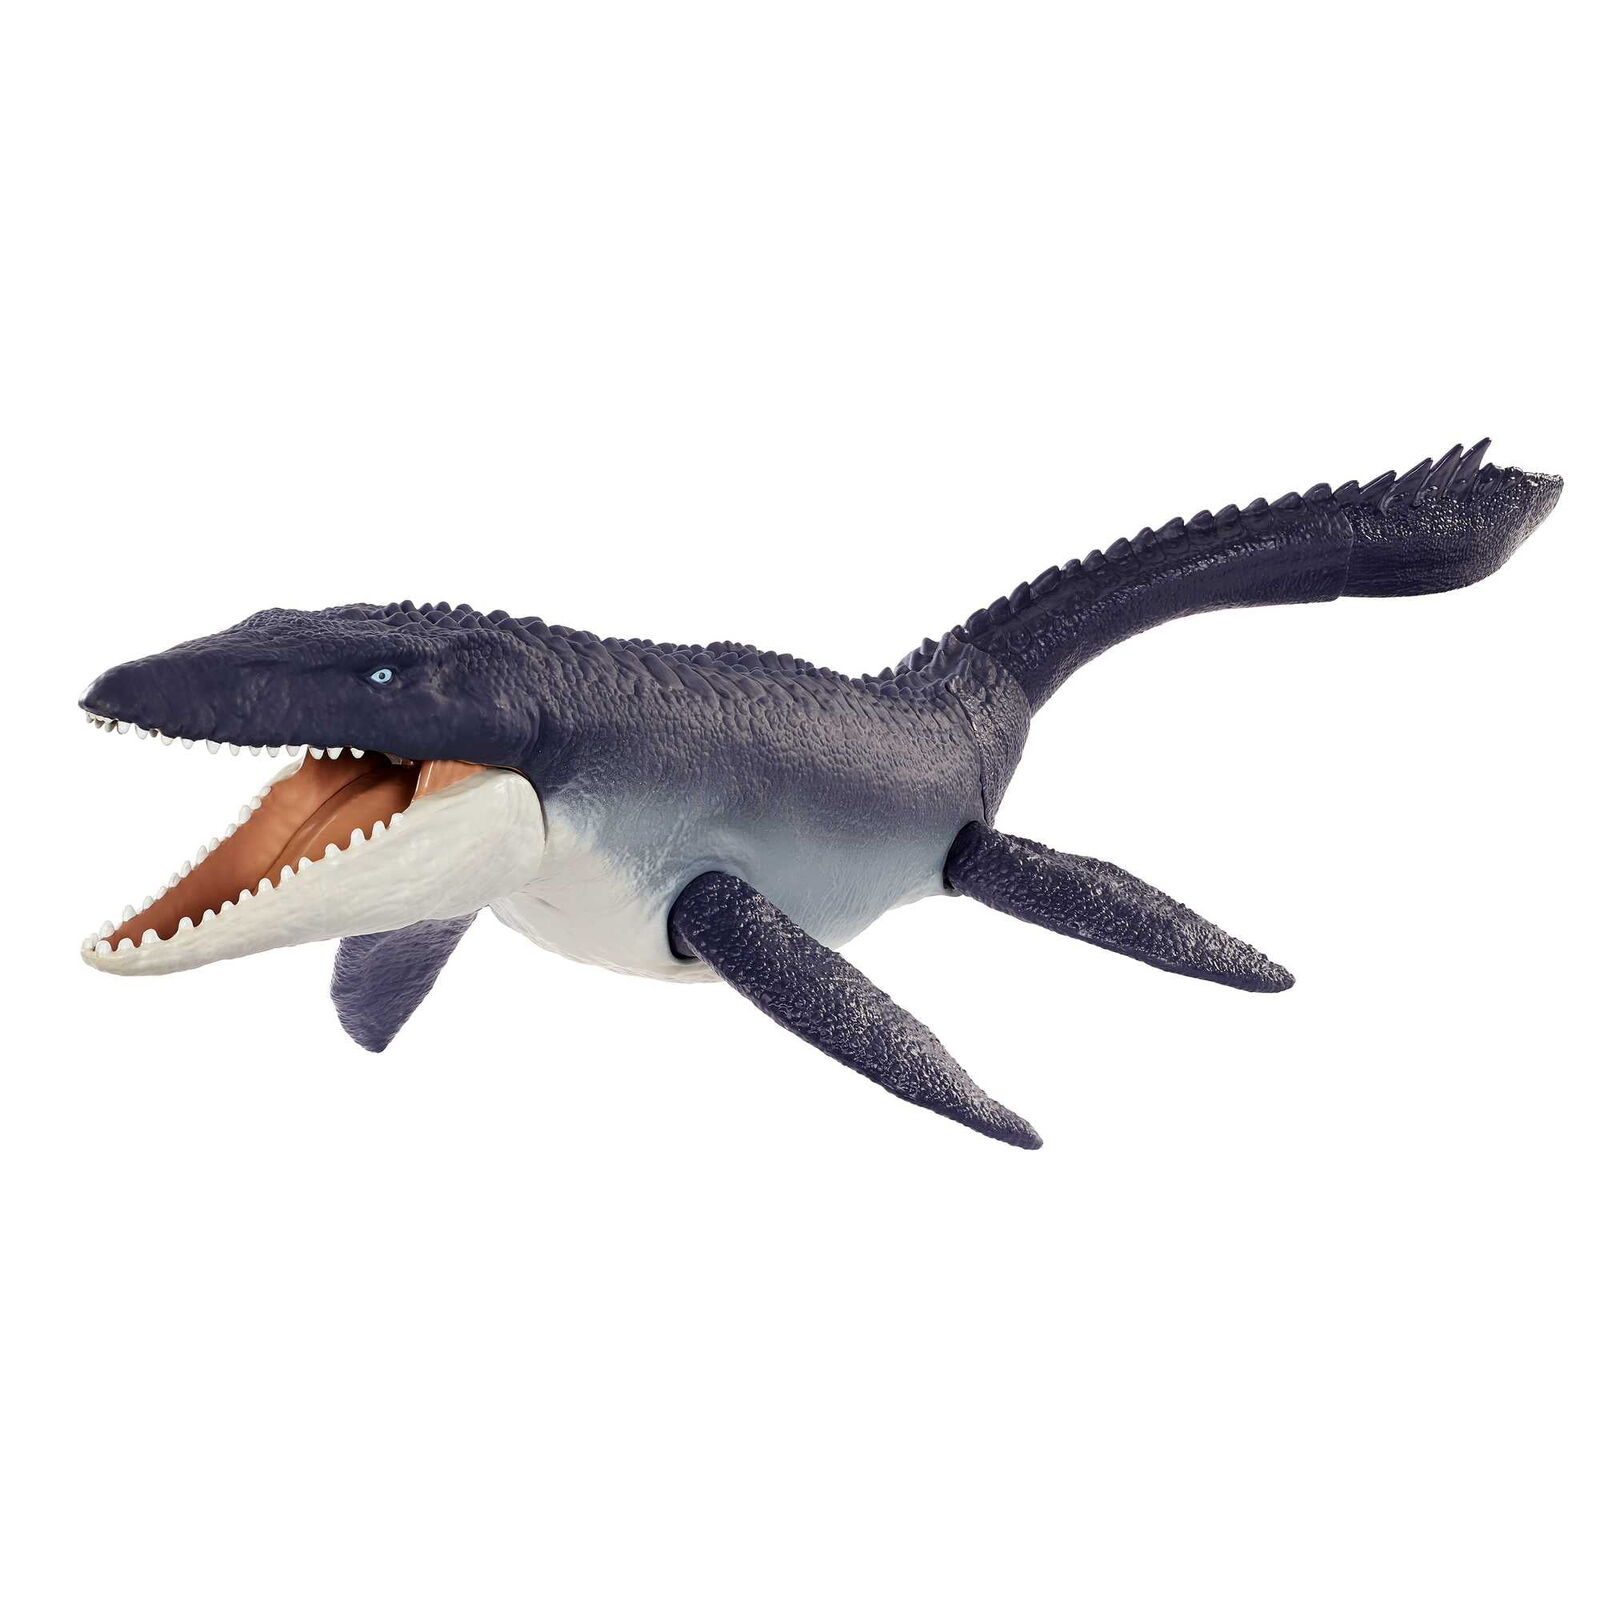 Dominion Mosasaurus Dinosaur Toy 29 inch Action Figure, Poseable with DNA Code